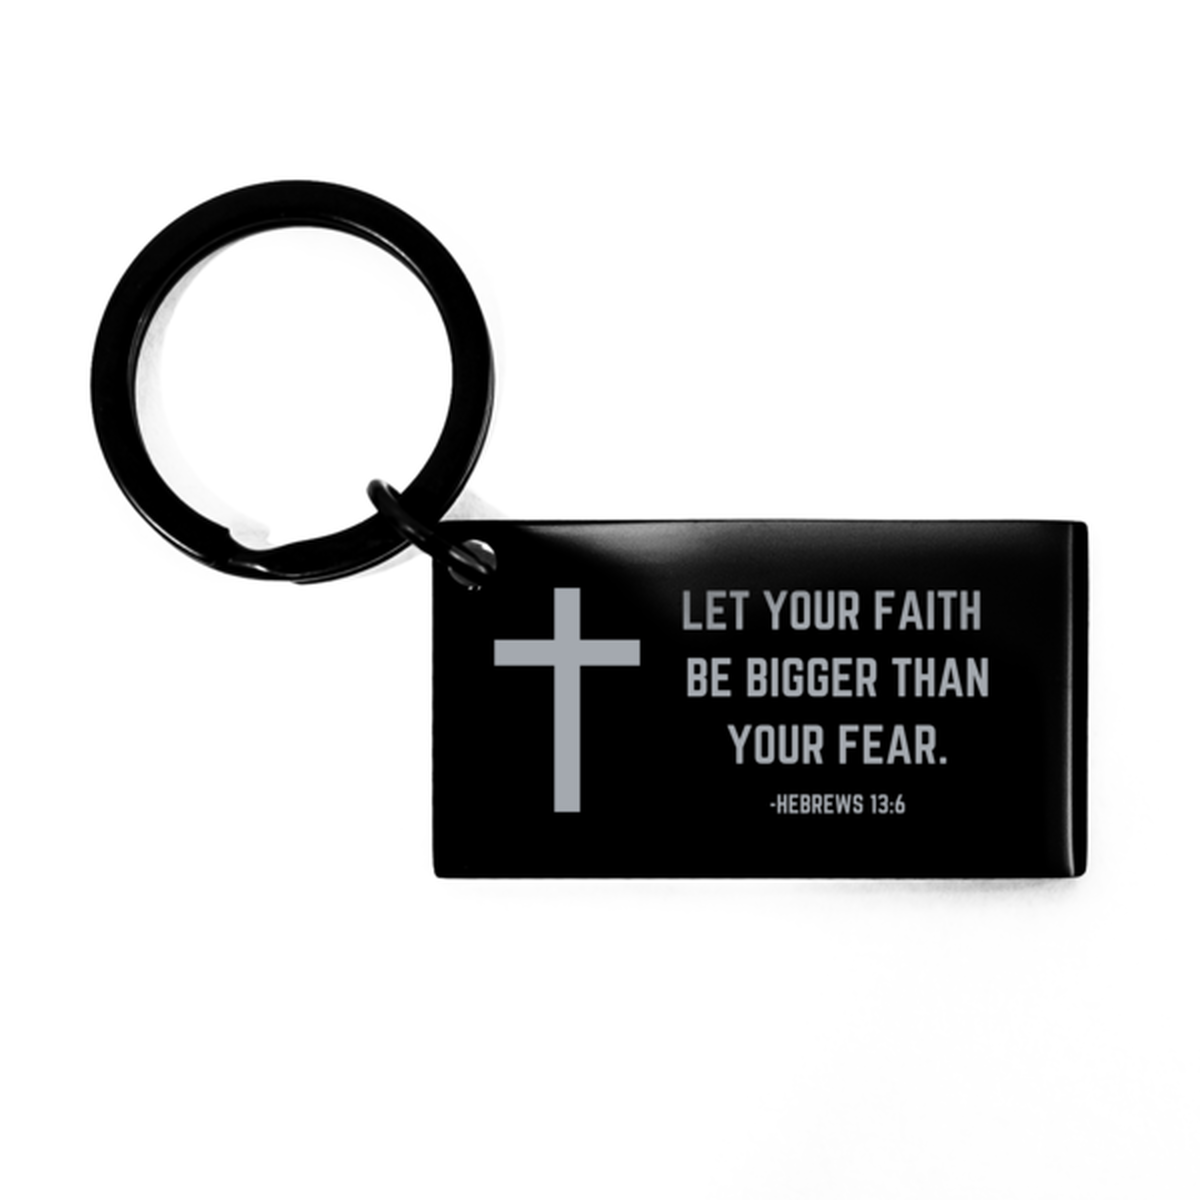 Baptism Gifts For Teenage Boys Girls, Christian Bible Verse Black Keychain, Let your faith be bigger than your fear, Confirmation Gifts, Bible Verse Keyring for Son, Godson, Grandson, Nephew